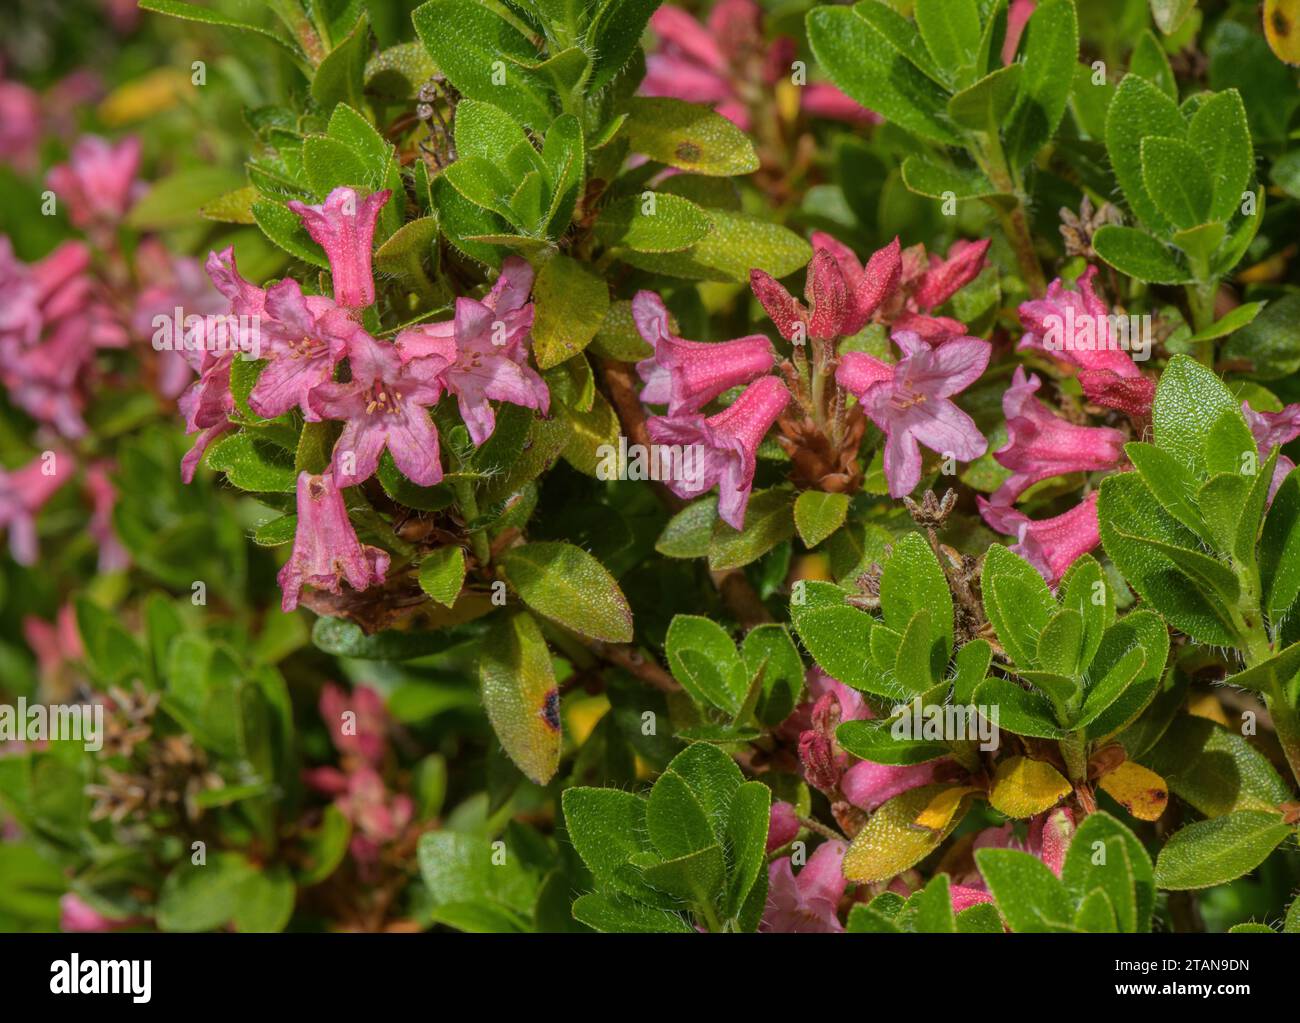 Hairy Alpenrose, Rhododendron hirsutum in flower. Stock Photo